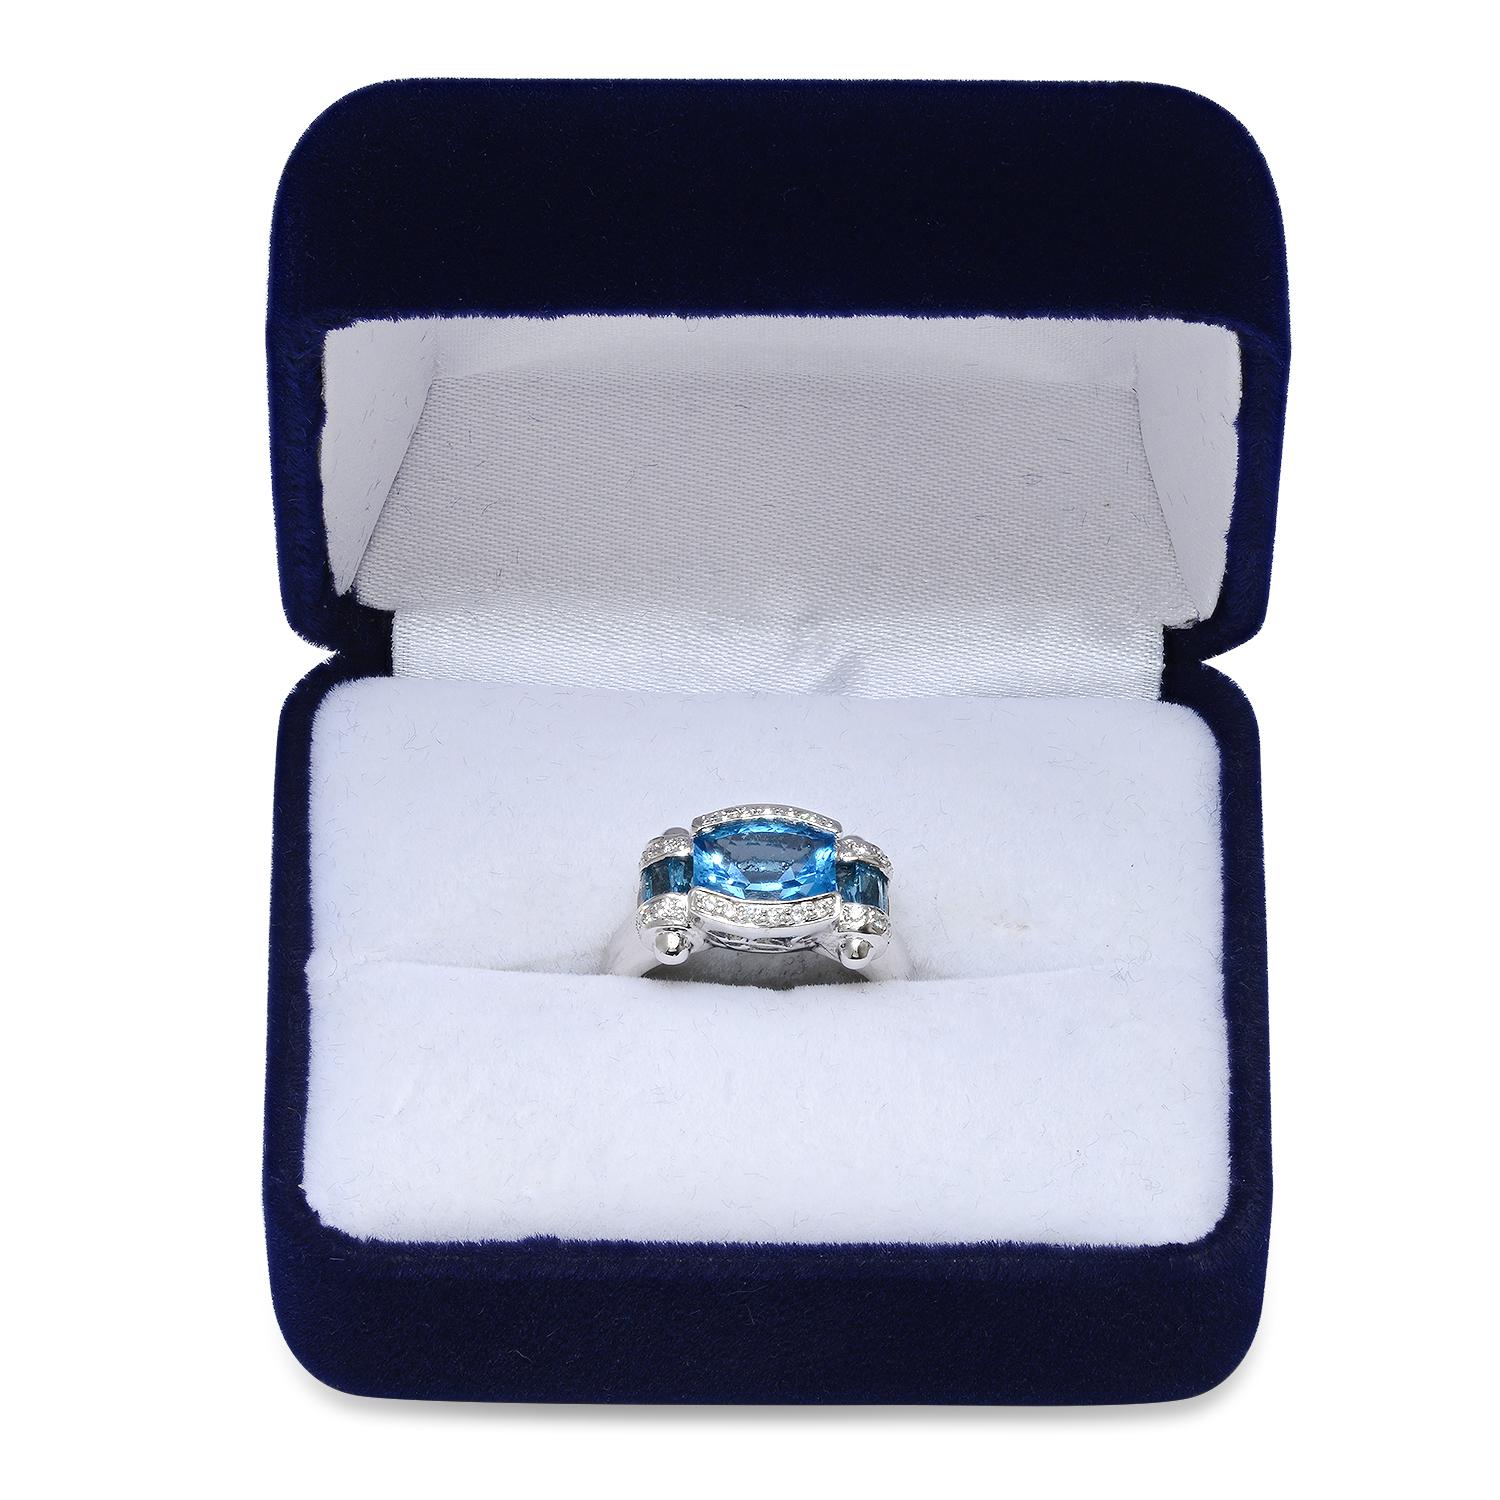 18K White Gold Setting with 2.55ct Blue Topaz and 0.13ct Diamond Ladies Ring